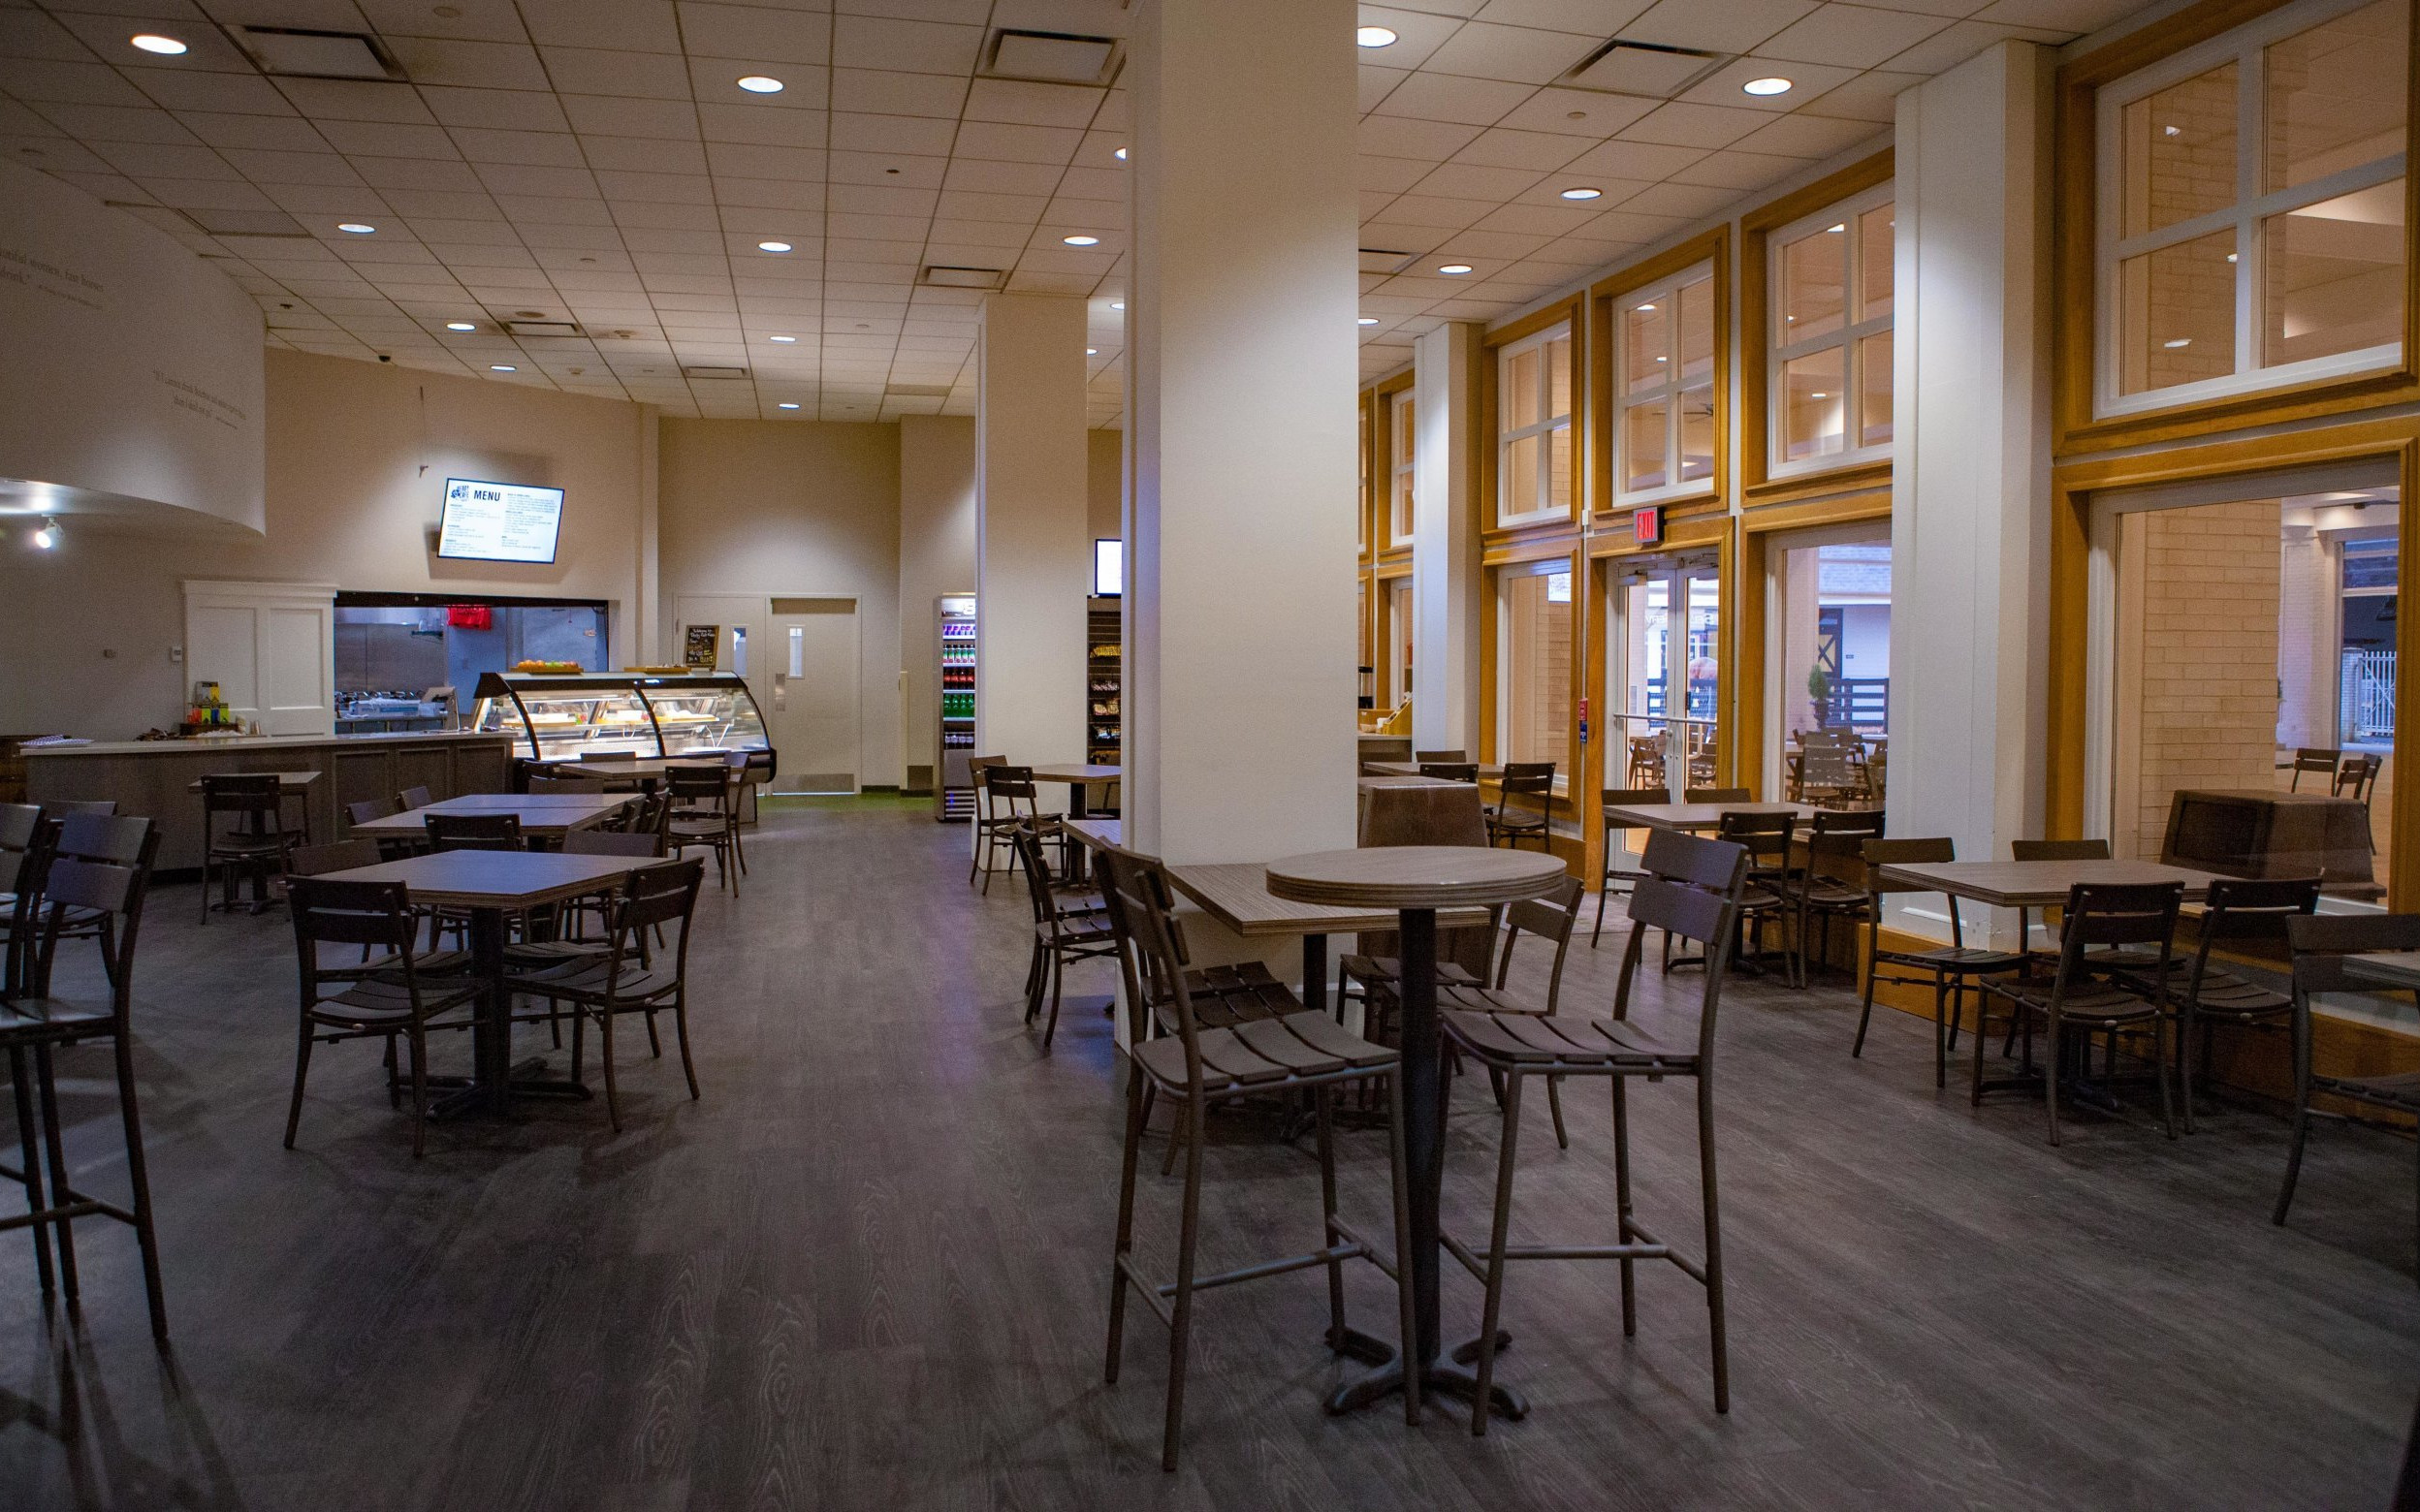 New Derby Cafe Express concept is now open for breakfast and lunch at the Kentucky Derby Museum